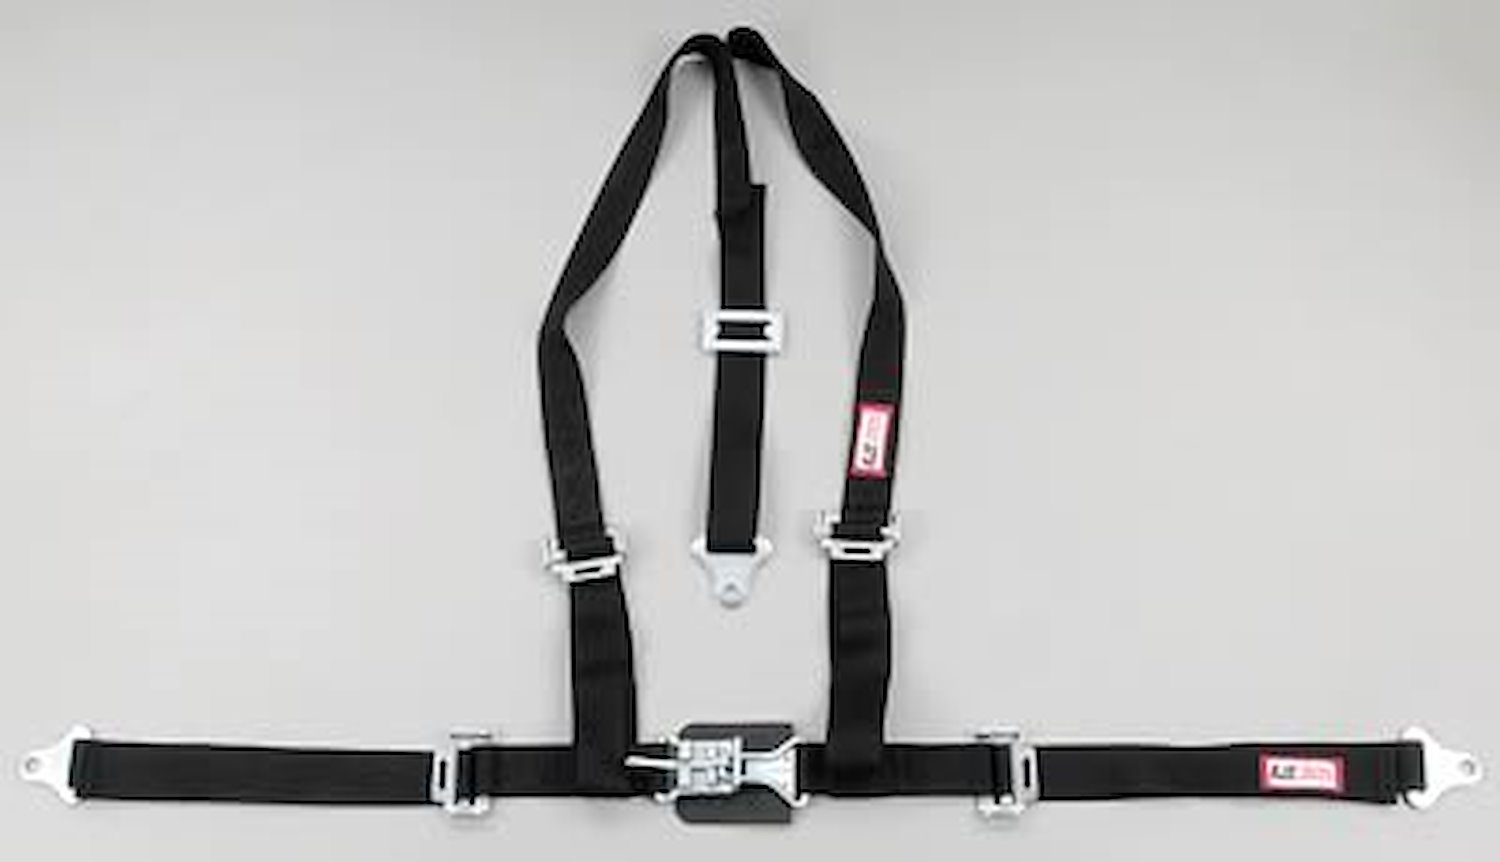 NON-SFI L&L HARNESS 3 PULL DOWN Lap Belt w/adjuster SNAP 2 S.H. Individual FLOOR Mount w/STERNUM STRAP WRAP/SNAP GRAY